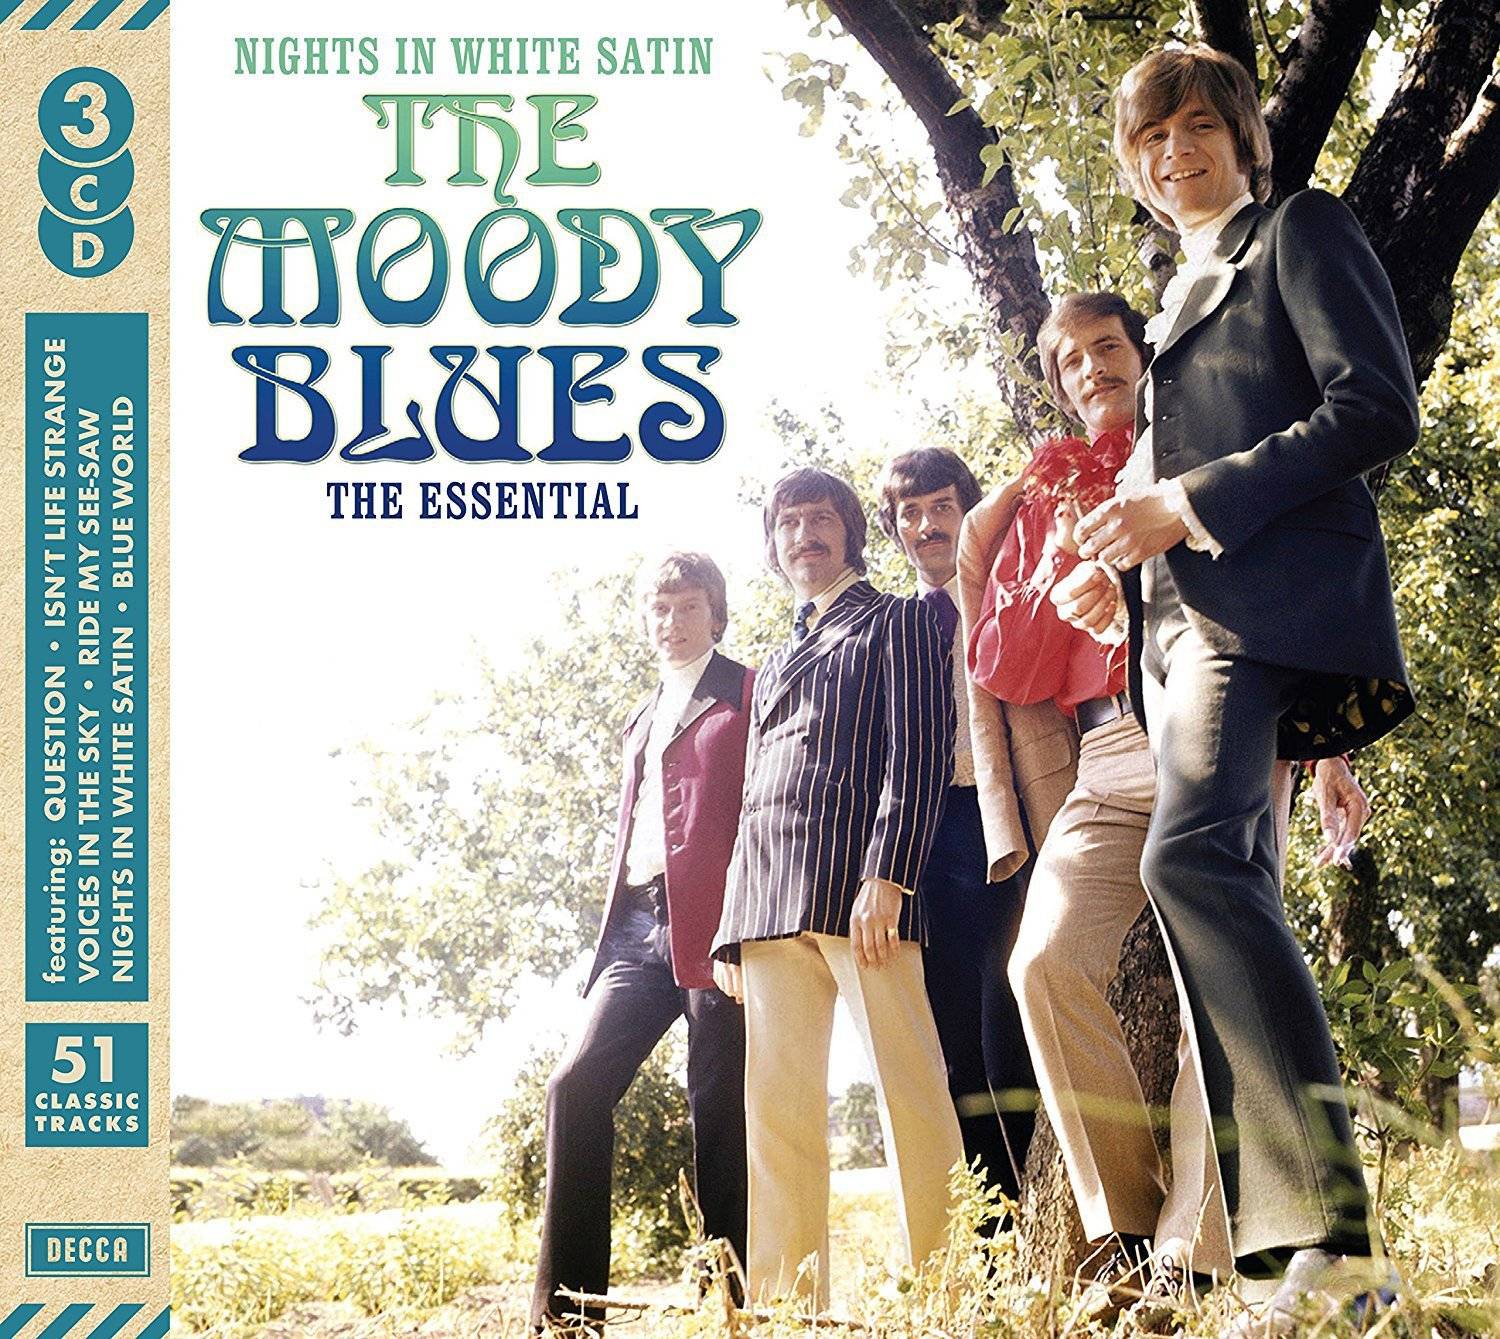 Moody Blues : Nights In White Satin - The Essential (3-CD)